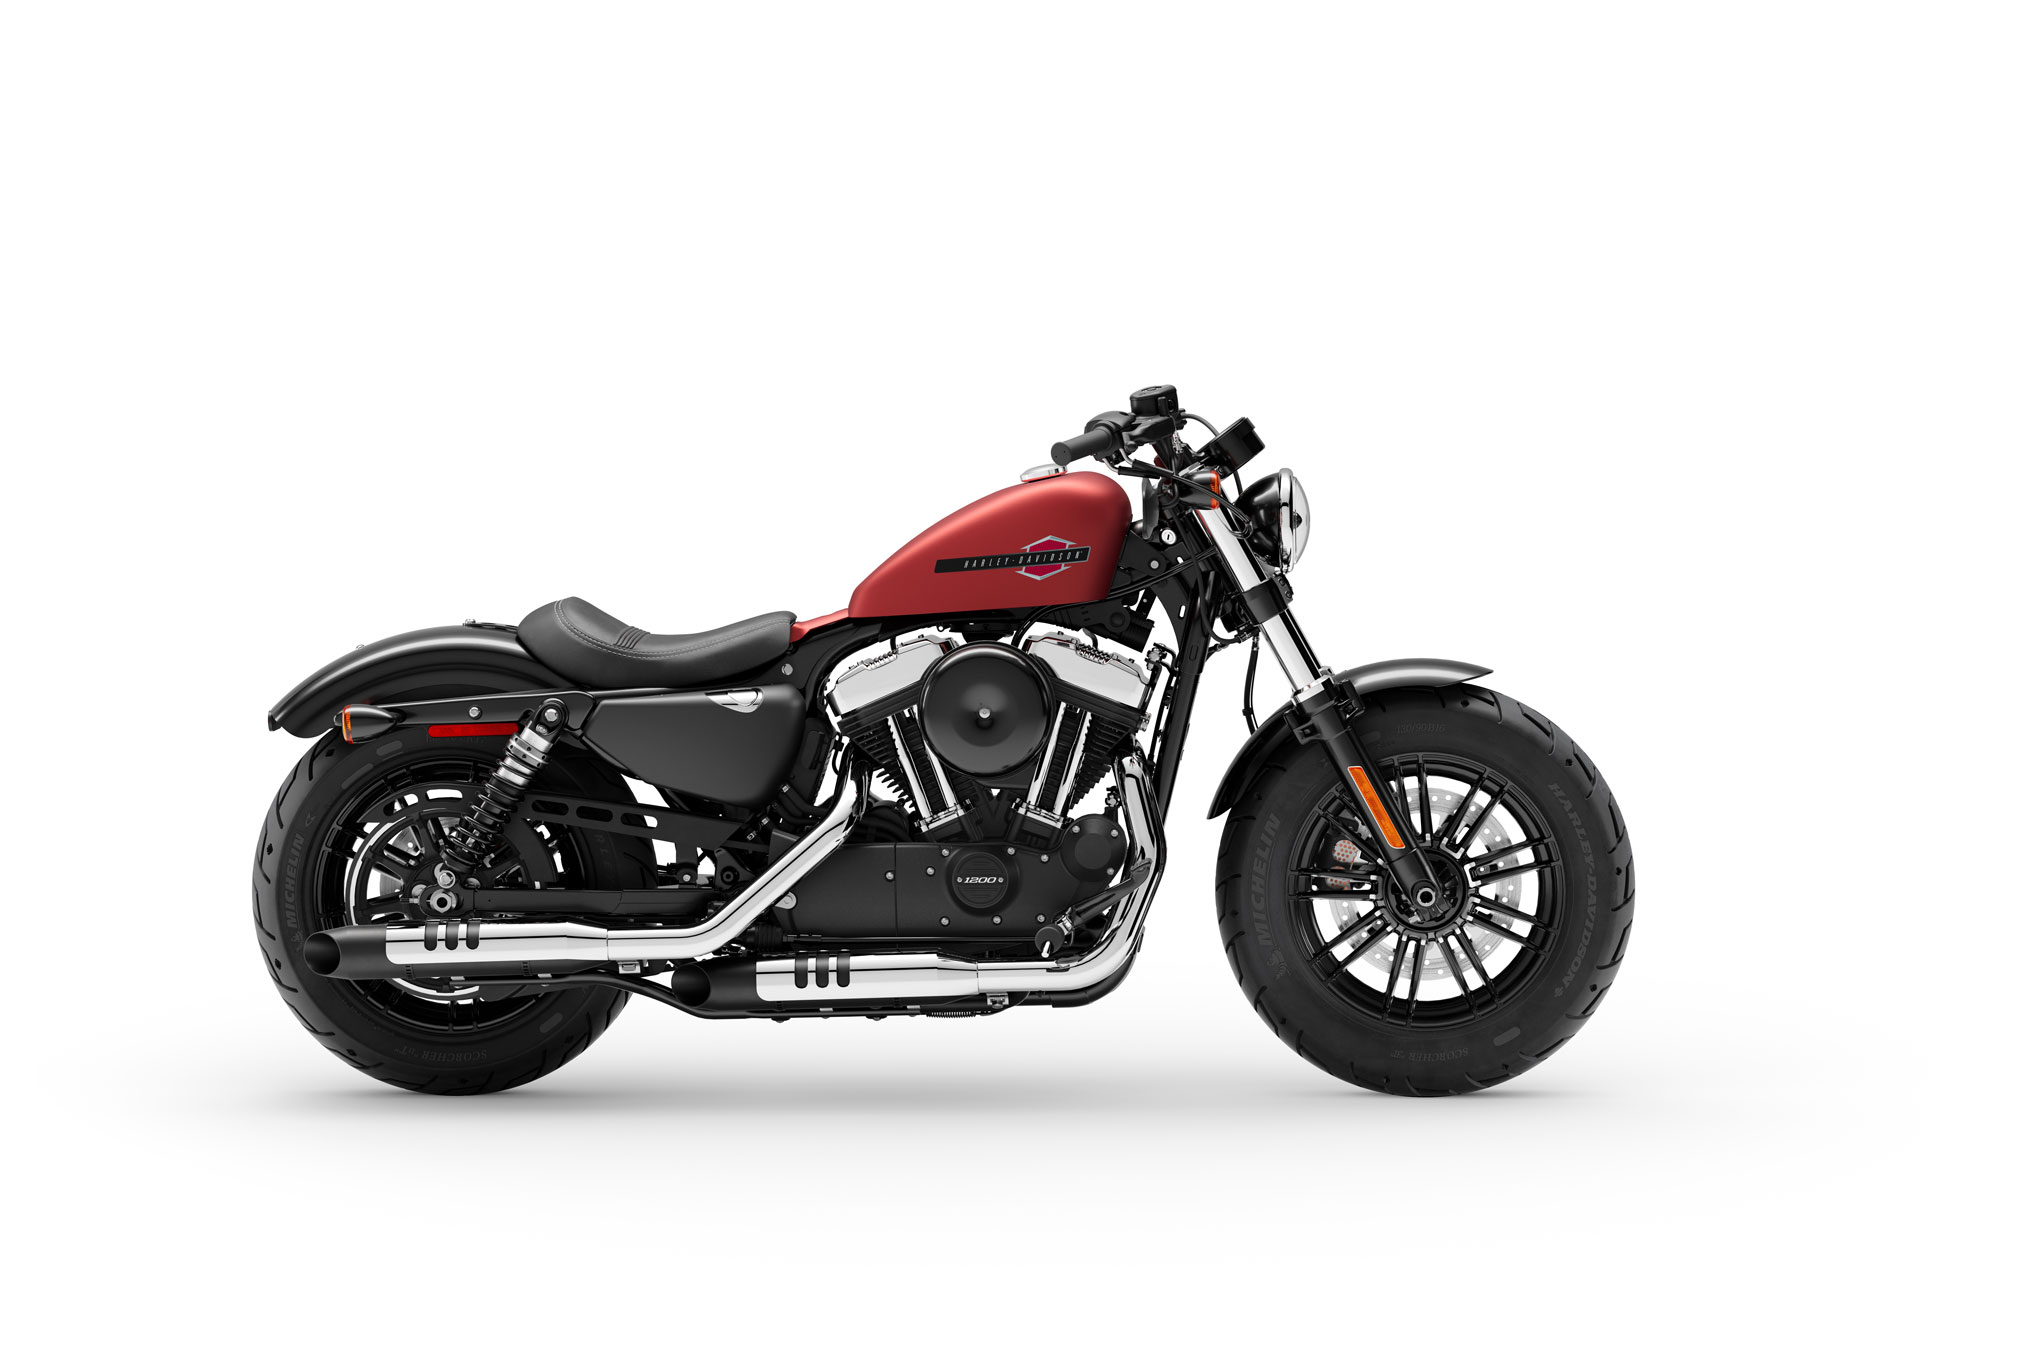 55 Harley Davidson 2019 Forty Eight Info Terpopuler